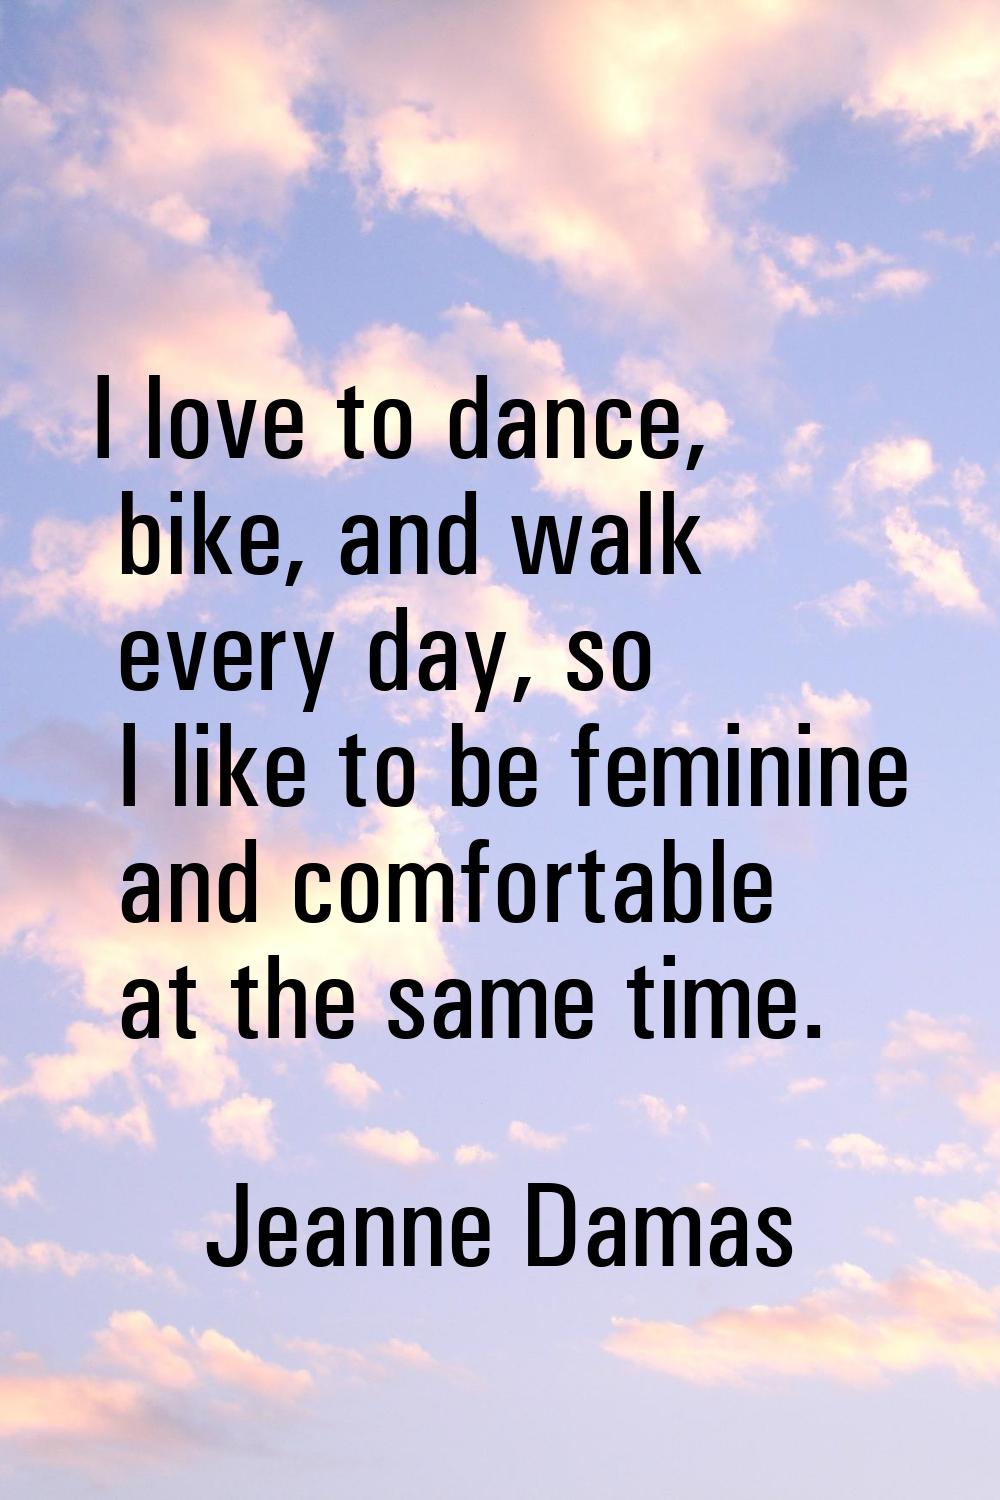 I love to dance, bike, and walk every day, so I like to be feminine and comfortable at the same tim